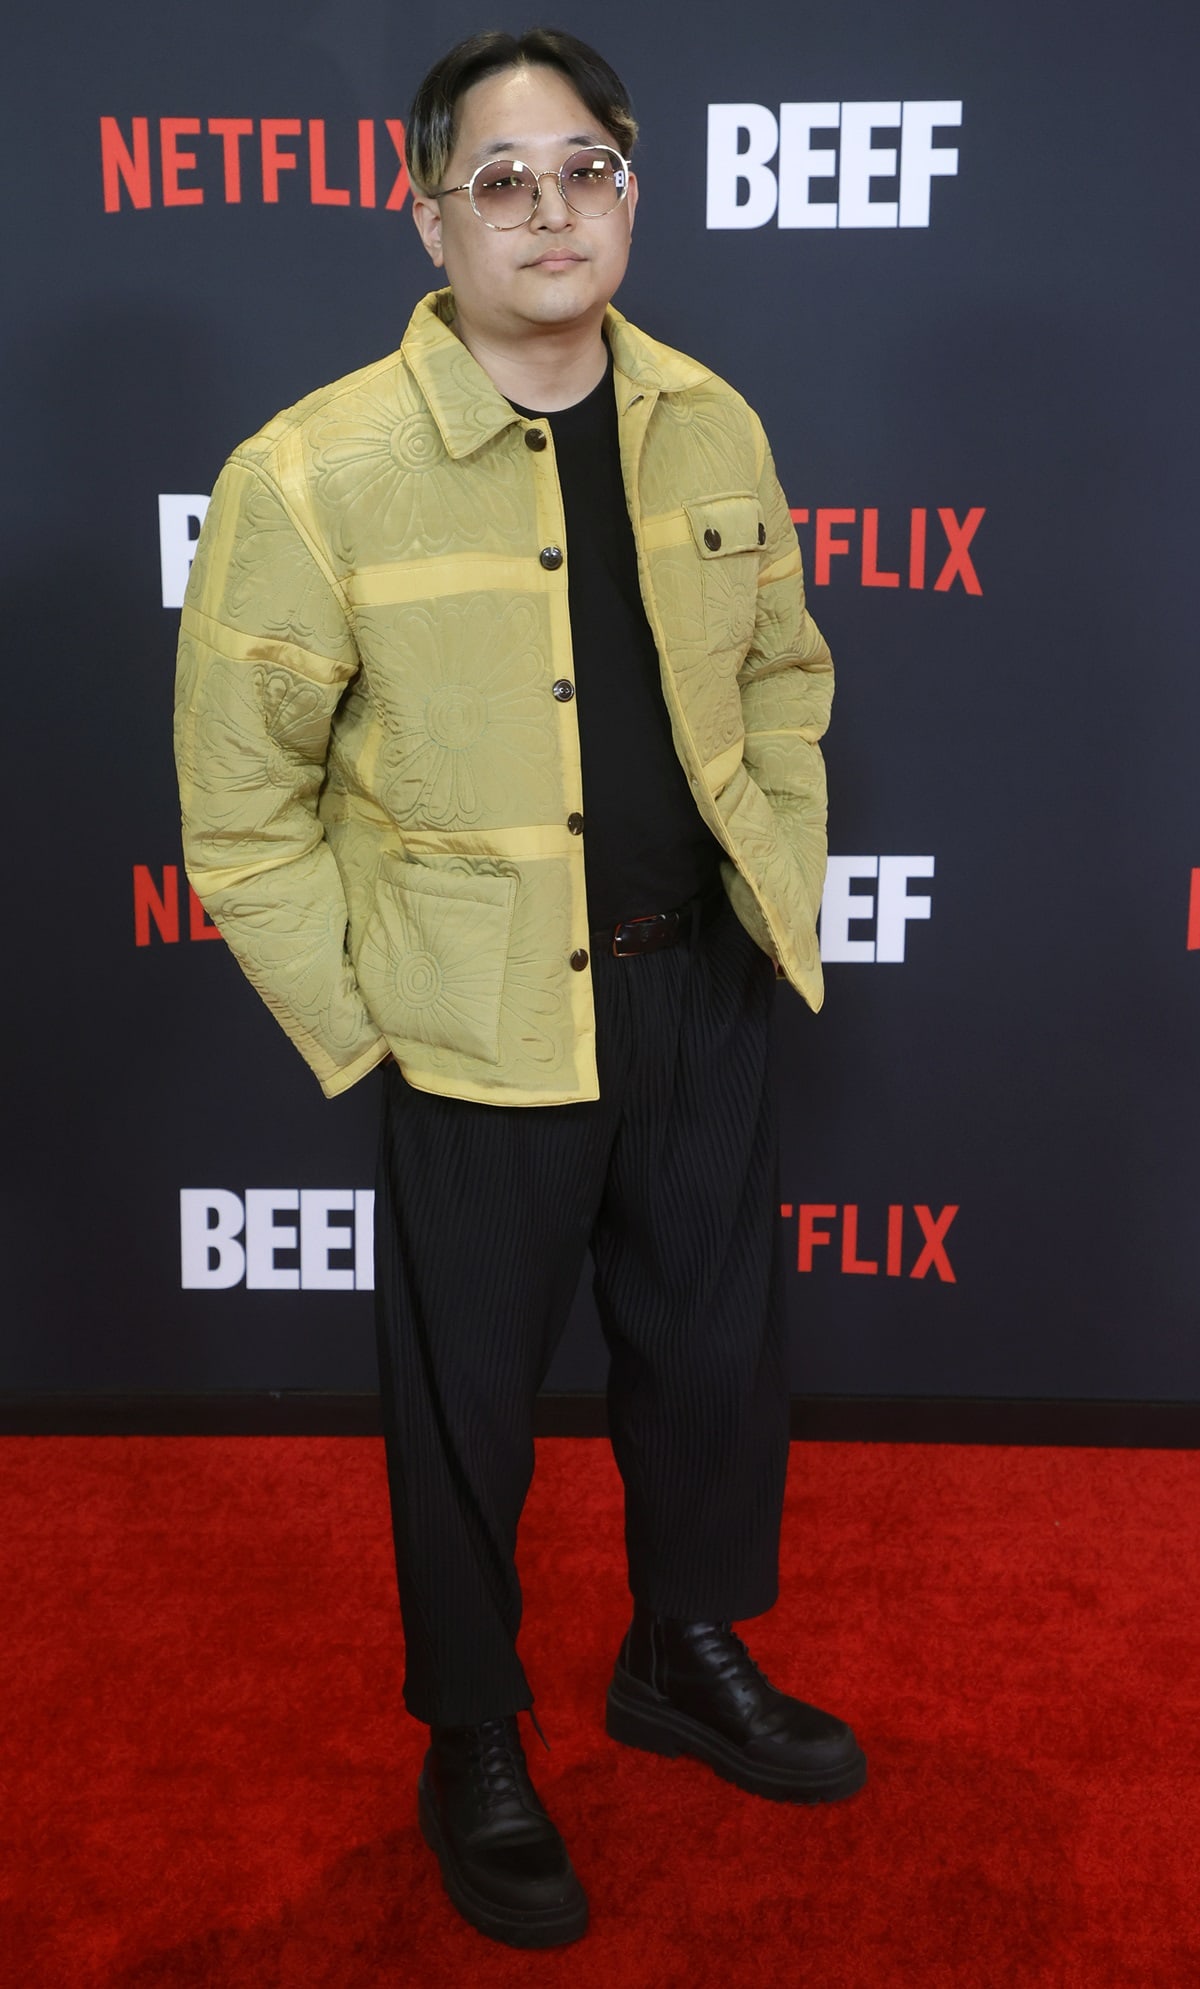 Rekstizzy portrays Bobby in the comedy-drama television series Beef created by Lee Sung Jin for Netflix